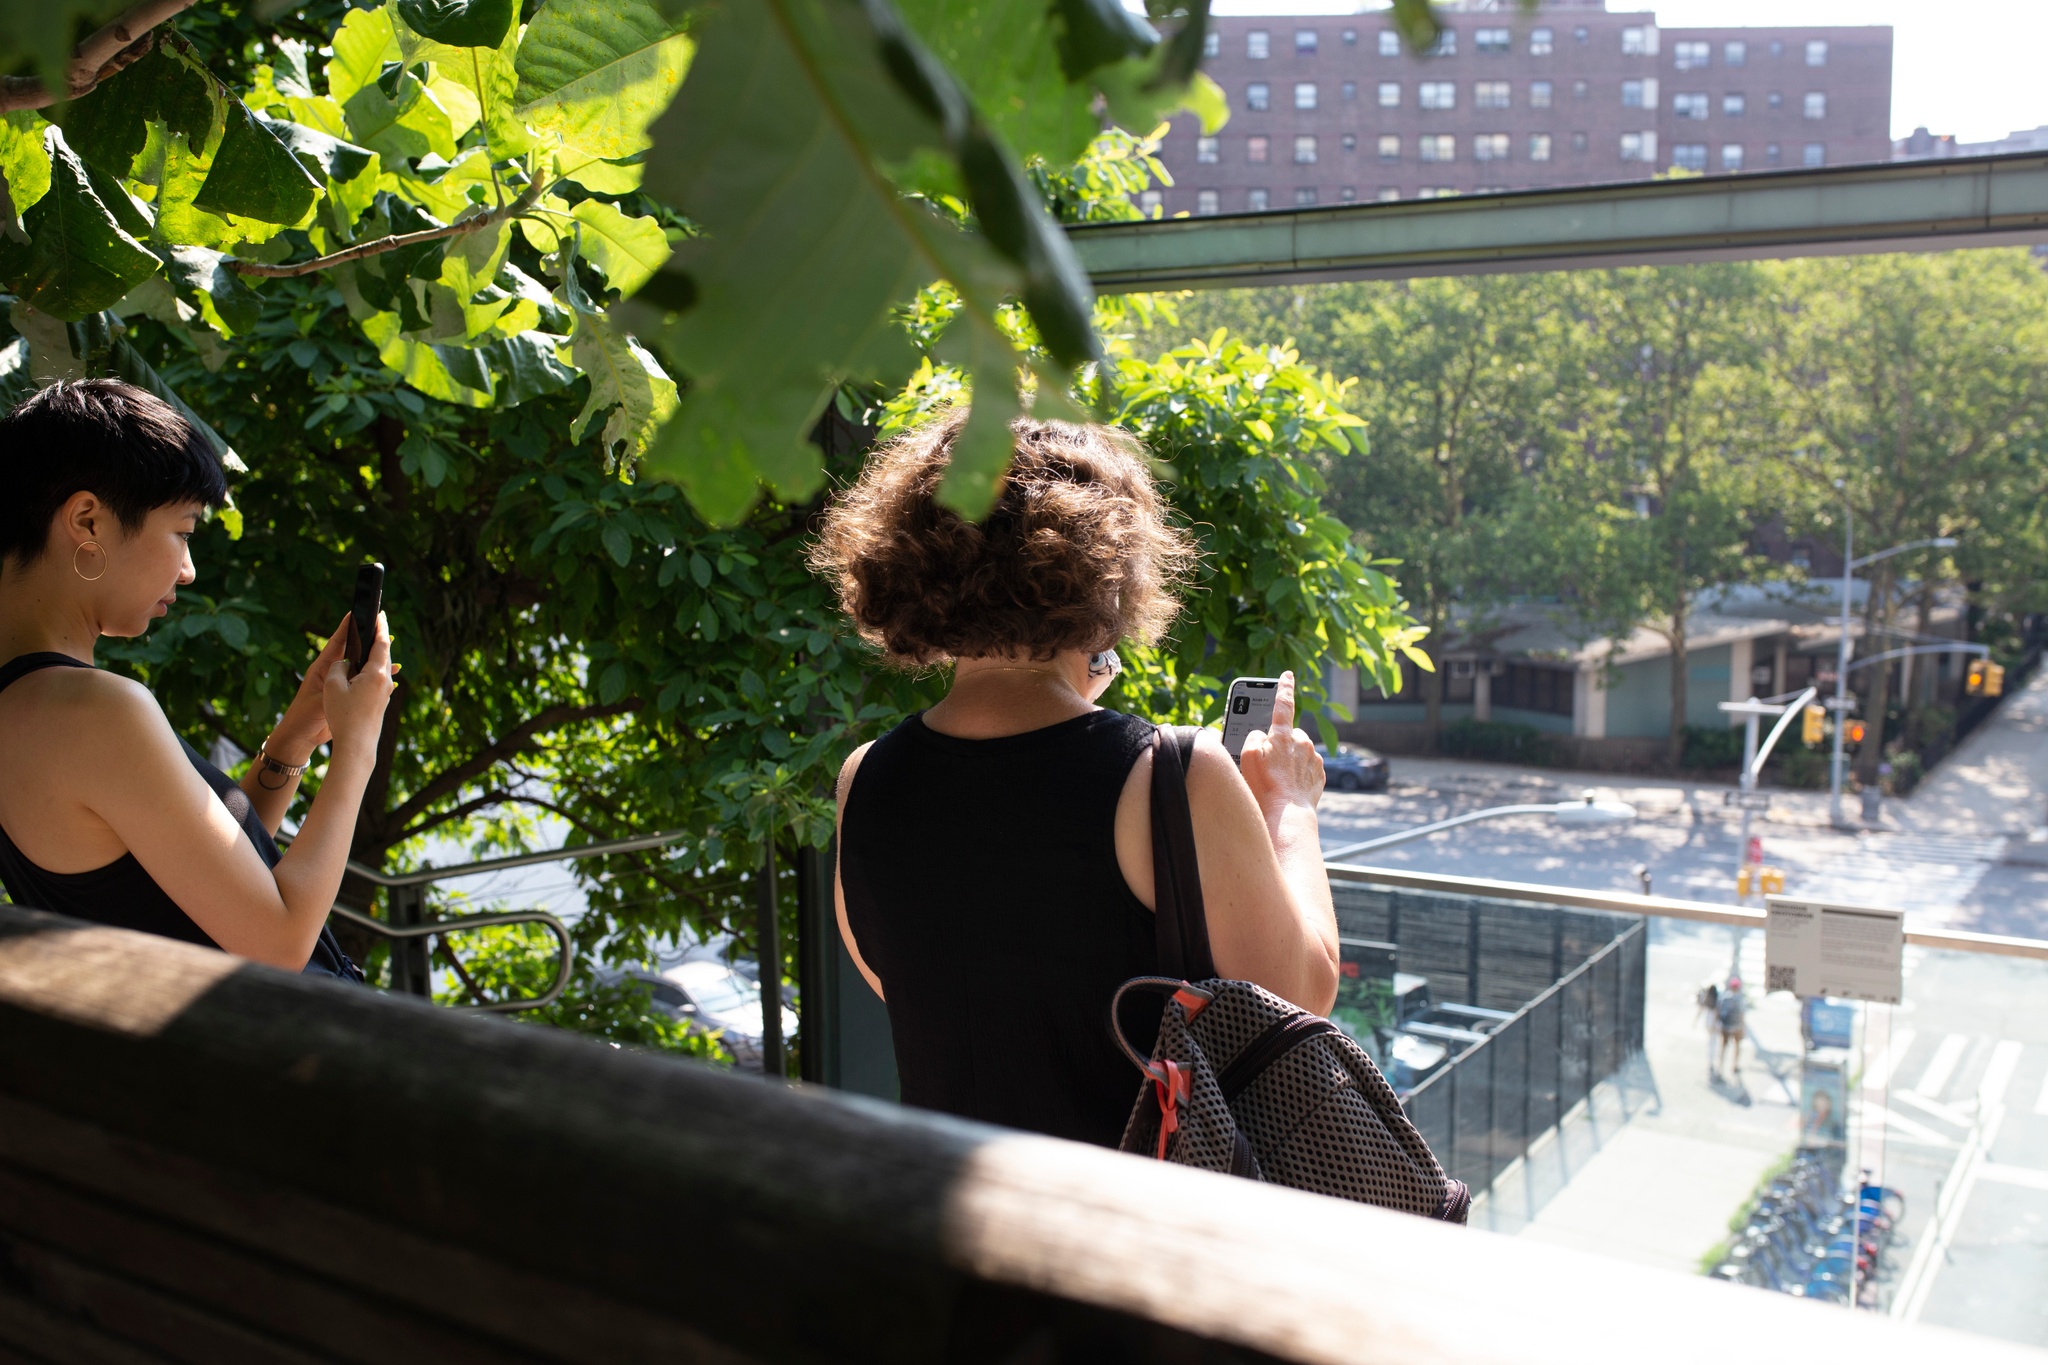 Two people aiming their phones at an artwork label on an overpass on the High Line. Beneath them a street is visible and they are surrounded by leafy green plants.